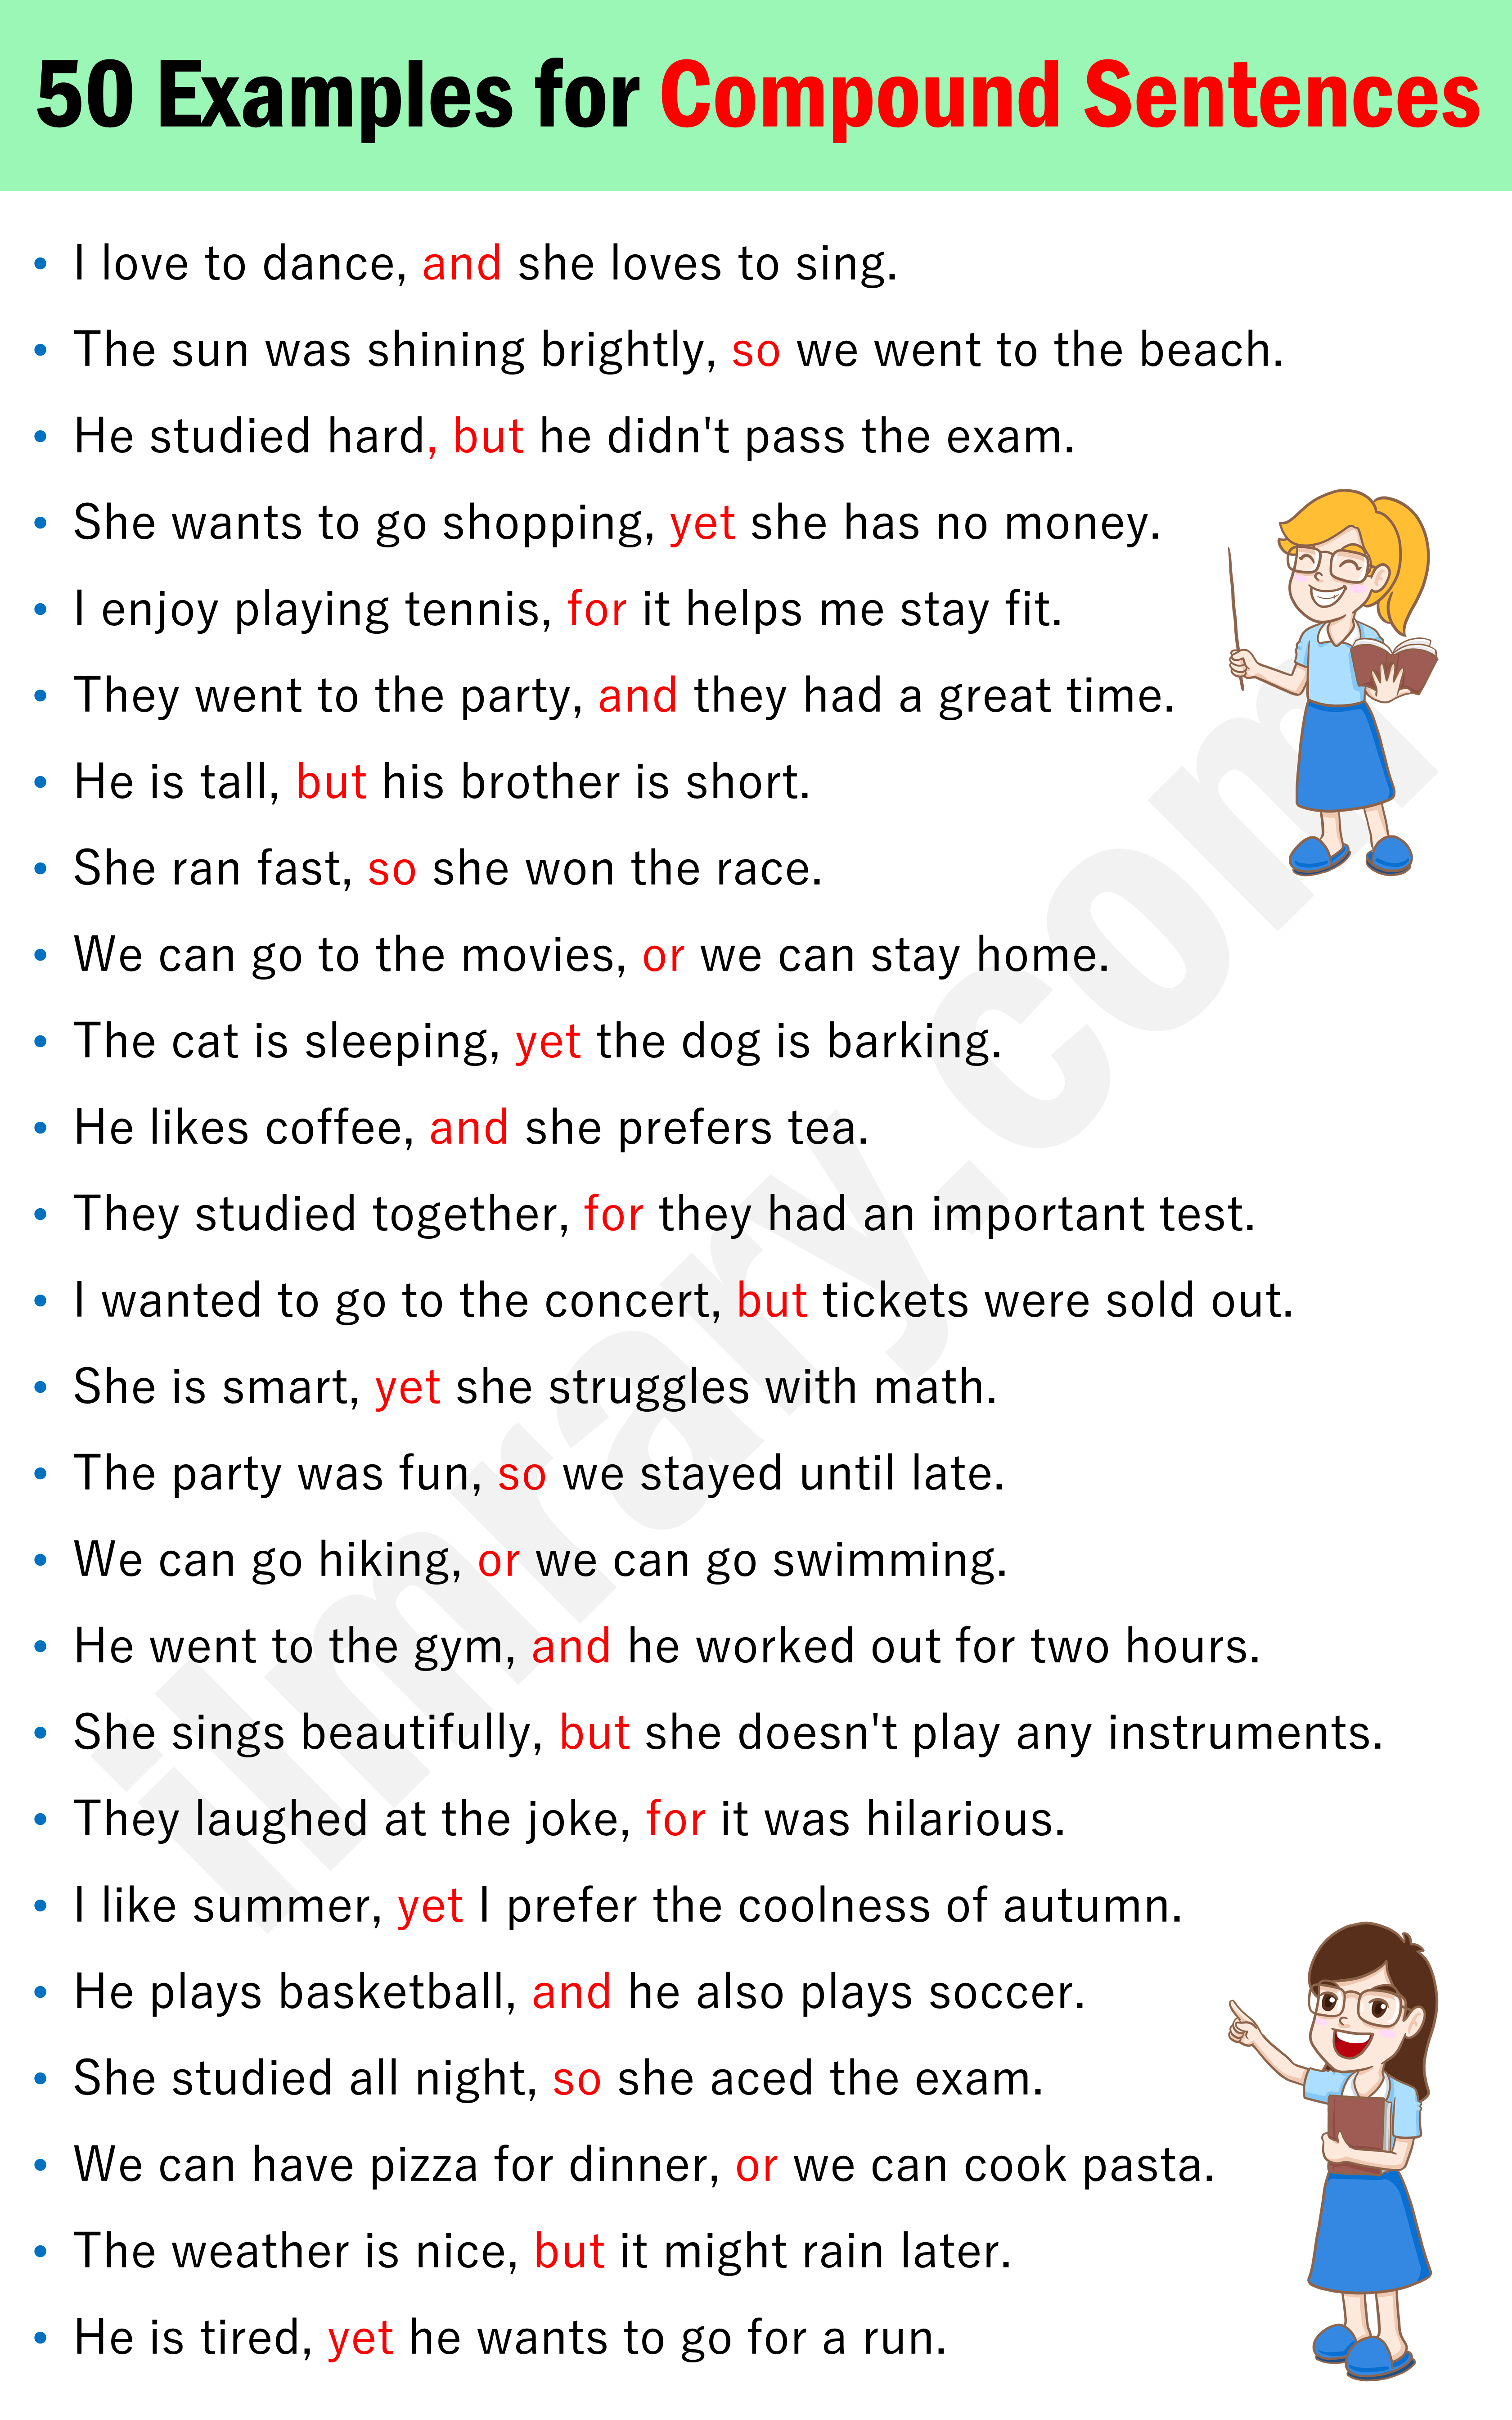 50 Compound Example Sentences in English